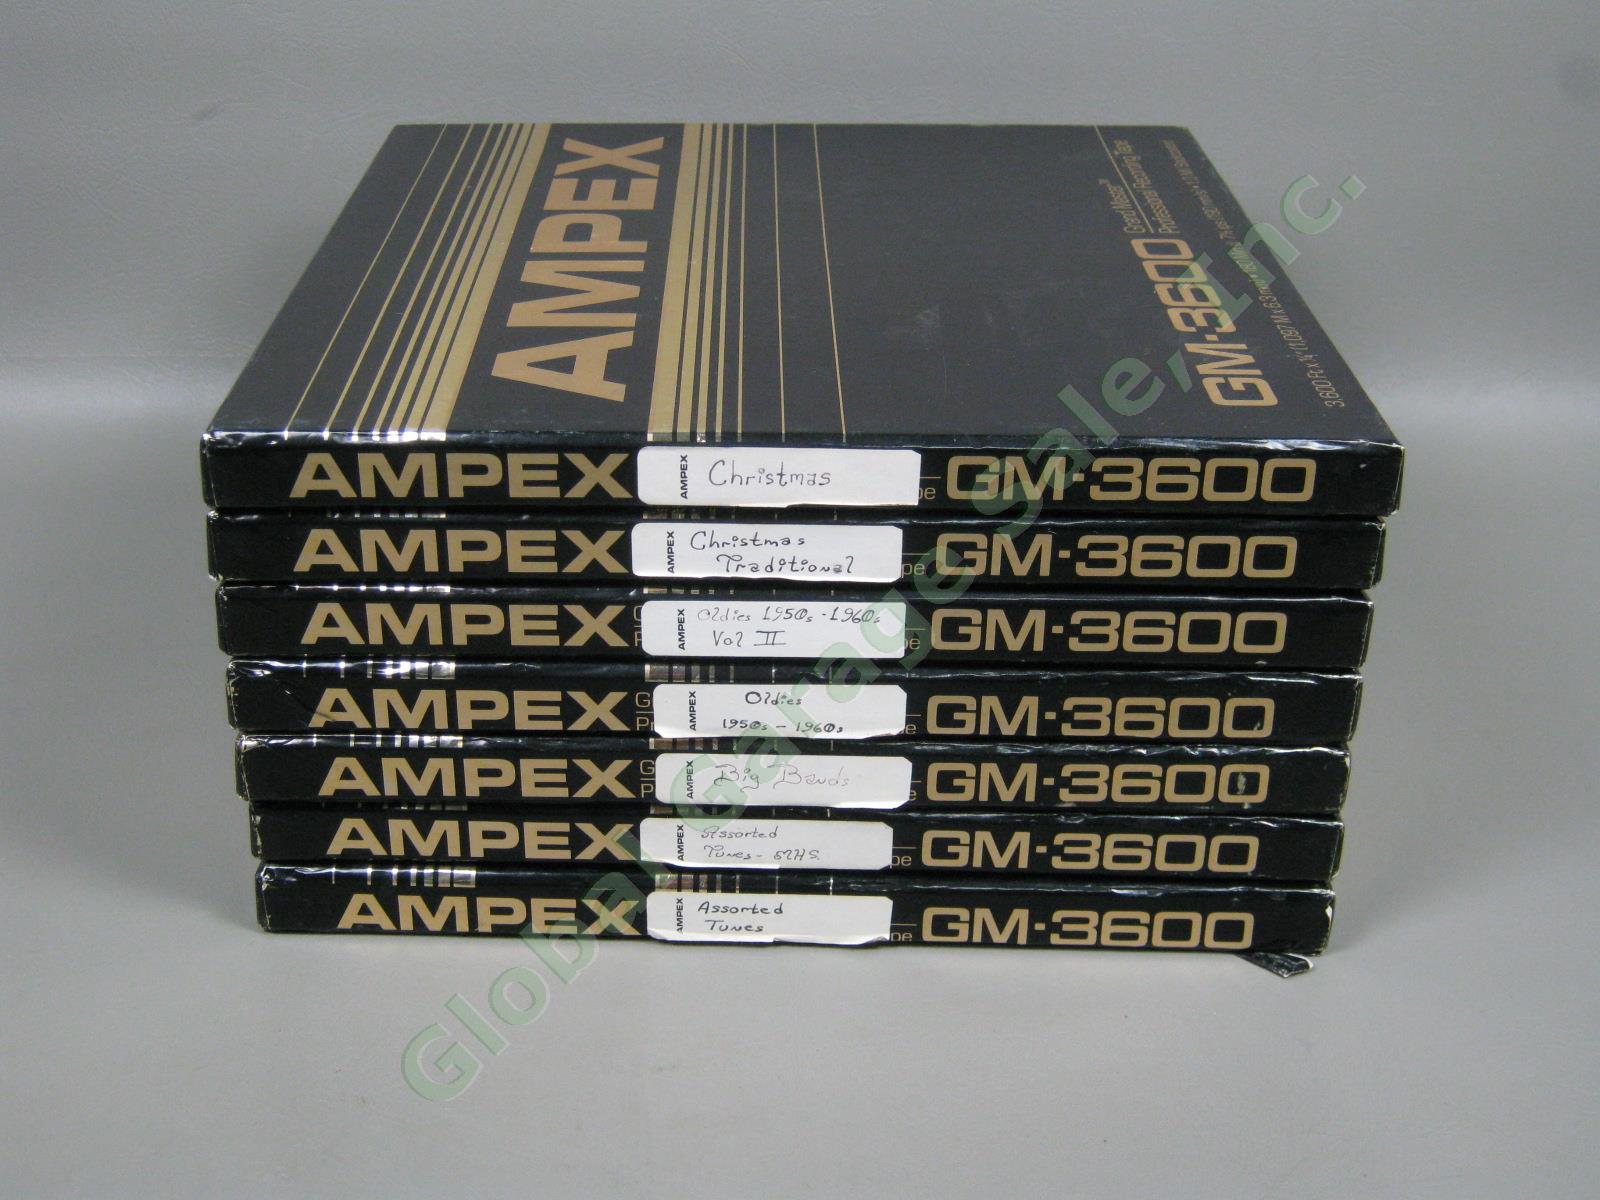 7 Vtg Used Ampex GM-3600 Grand Master Professional Recording Tapes On Metal Reel